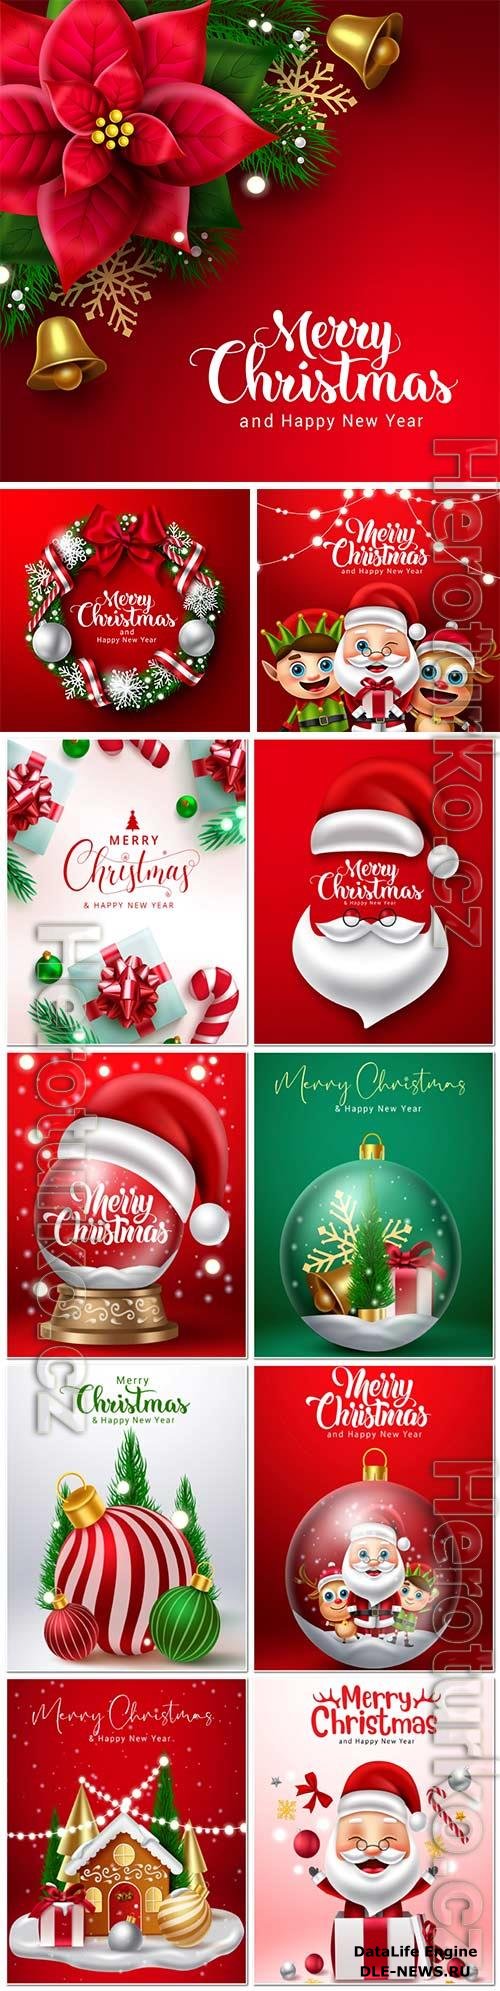 Merry christmas greeting vector background